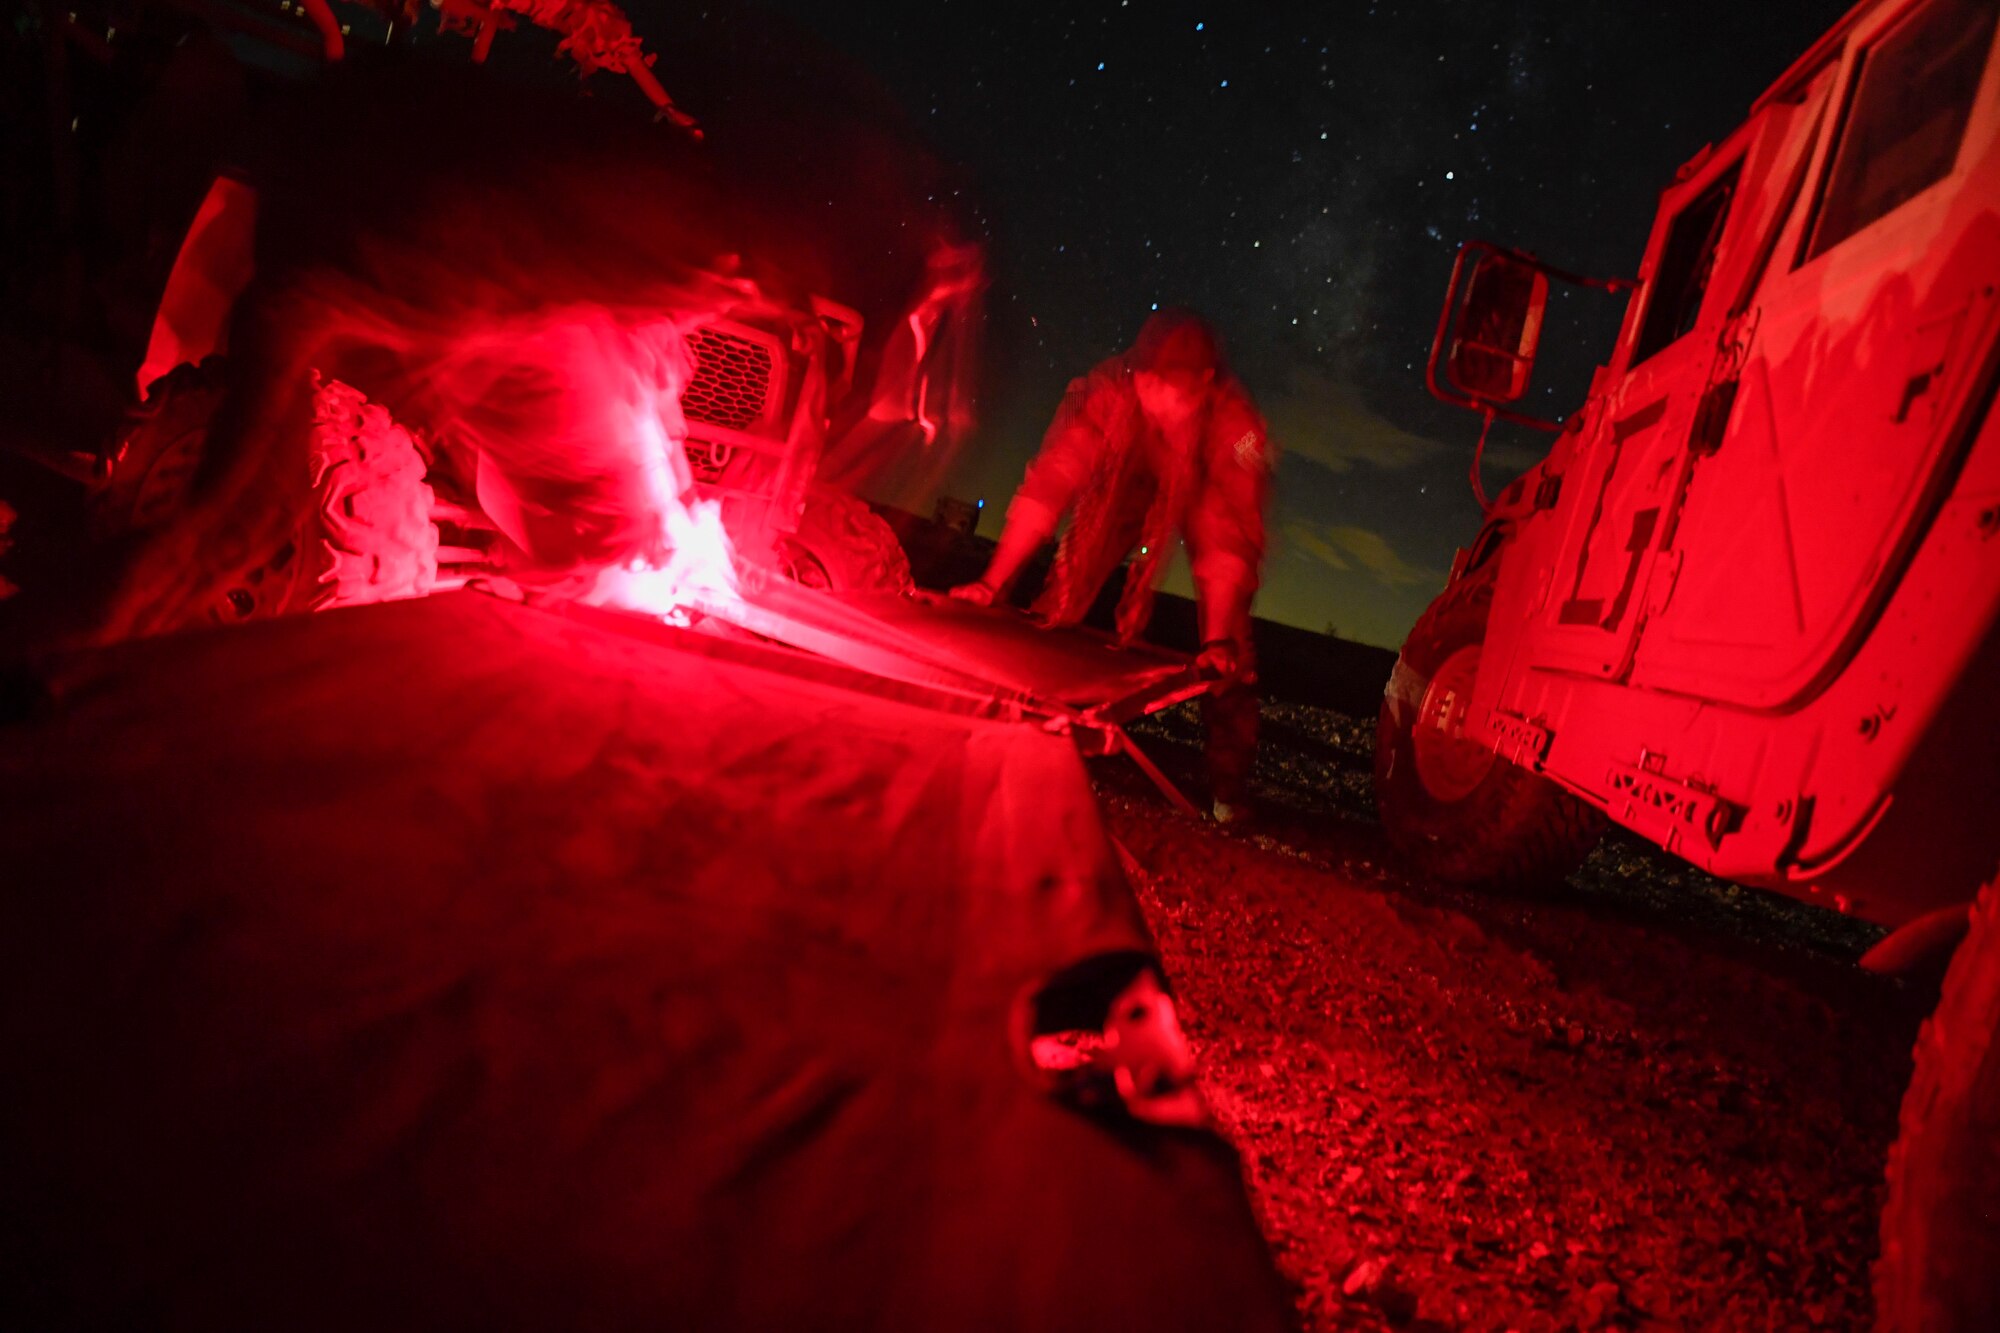 Special Tactics Airmen from the 21st Special Tactics Squadron from Pope Army Airfield, Fort Bragg, North Carolina, set up sleeping arrangements and a security detail during a scenario as part of NTC 18-10 at Fort Irwin, California, Sept. 4, 2018.